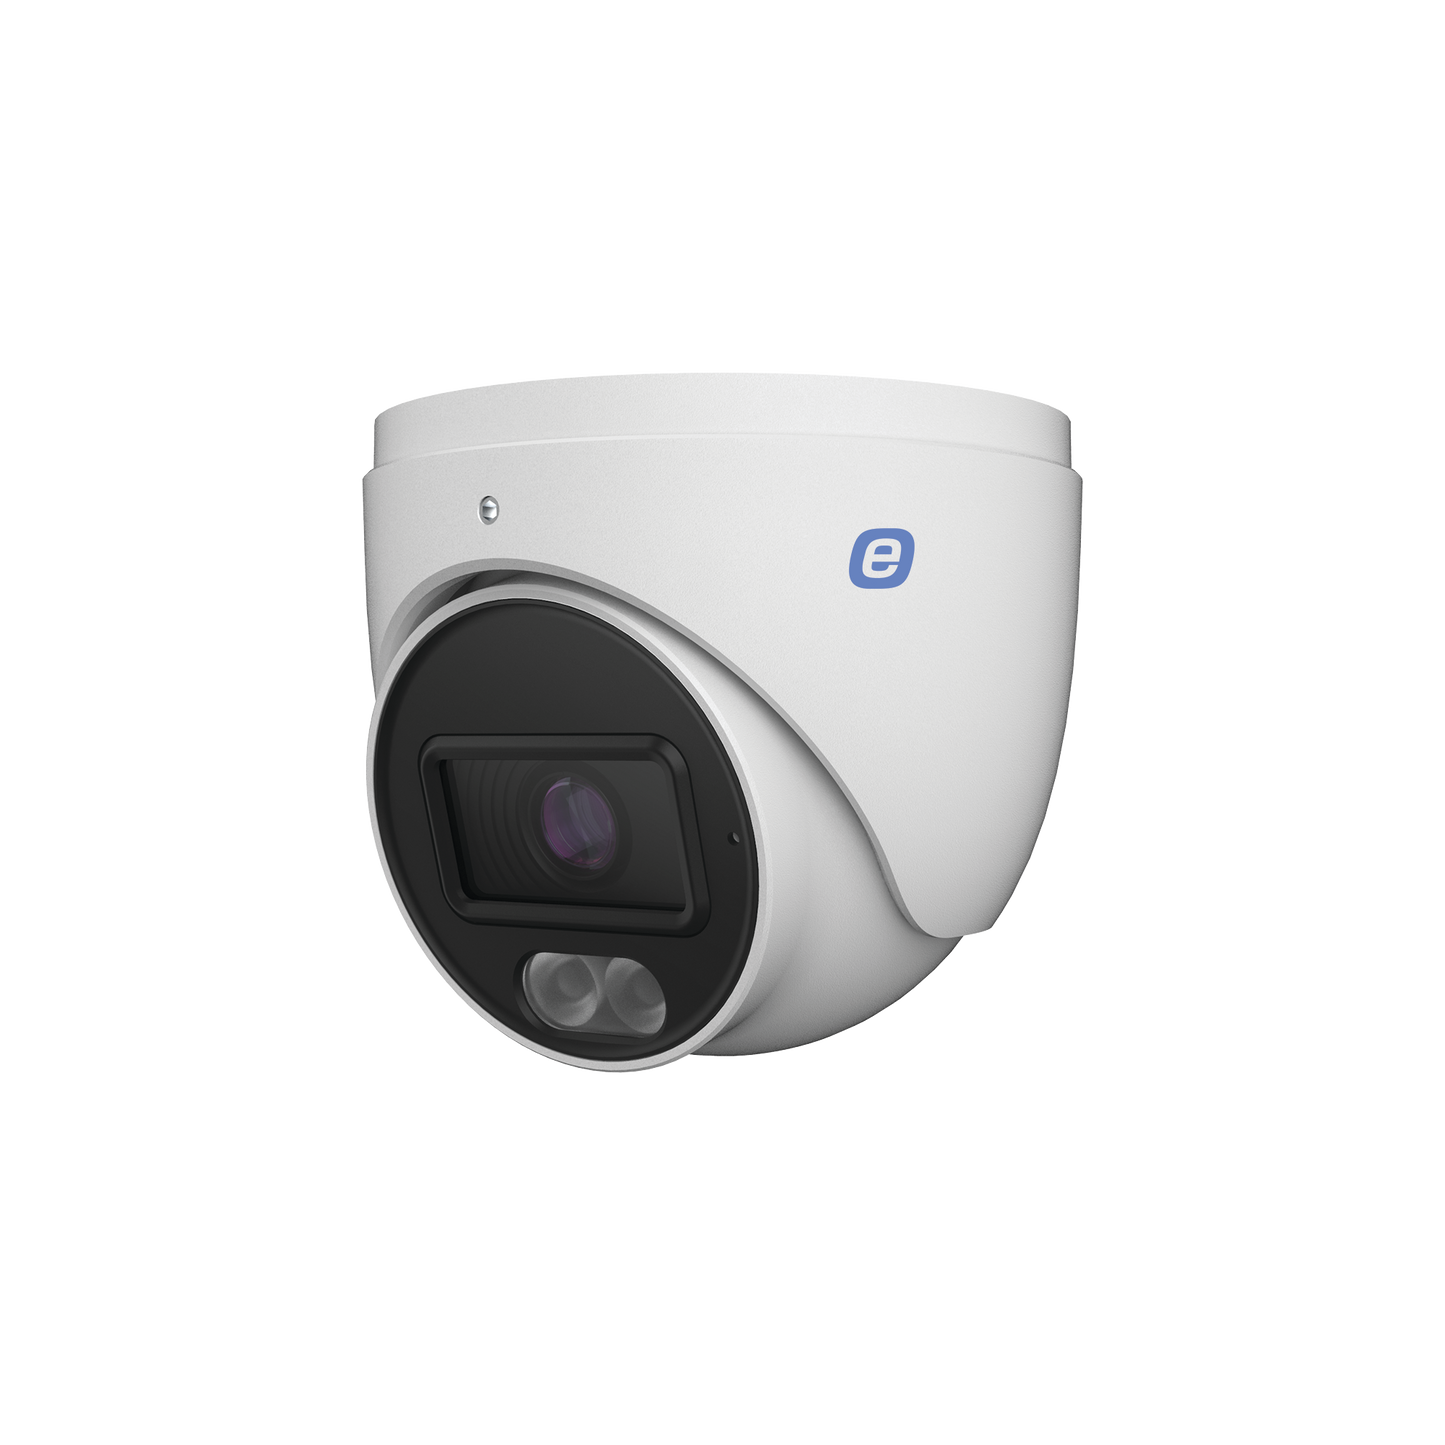 HD-TVI - Turret 2MP (1080p) / 24/7 Color Image / 98ft (30m) White Light / 2.8 mm Lens / IP67 / Metal Housing / Audio by coaxitron / Built-In Microphone